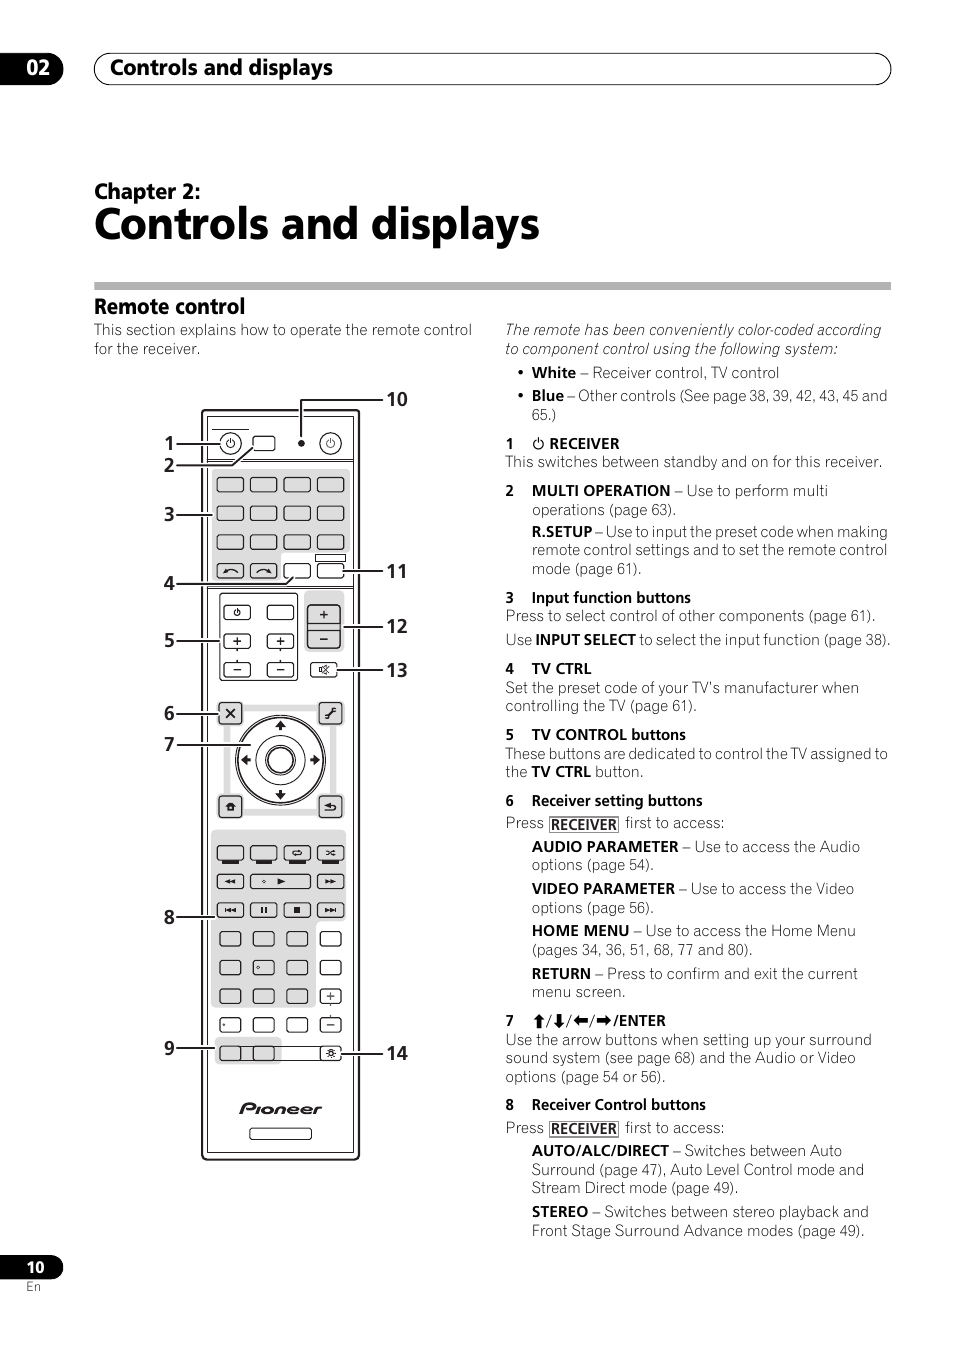 Controls and displays, Remote control, 02 controls and displays